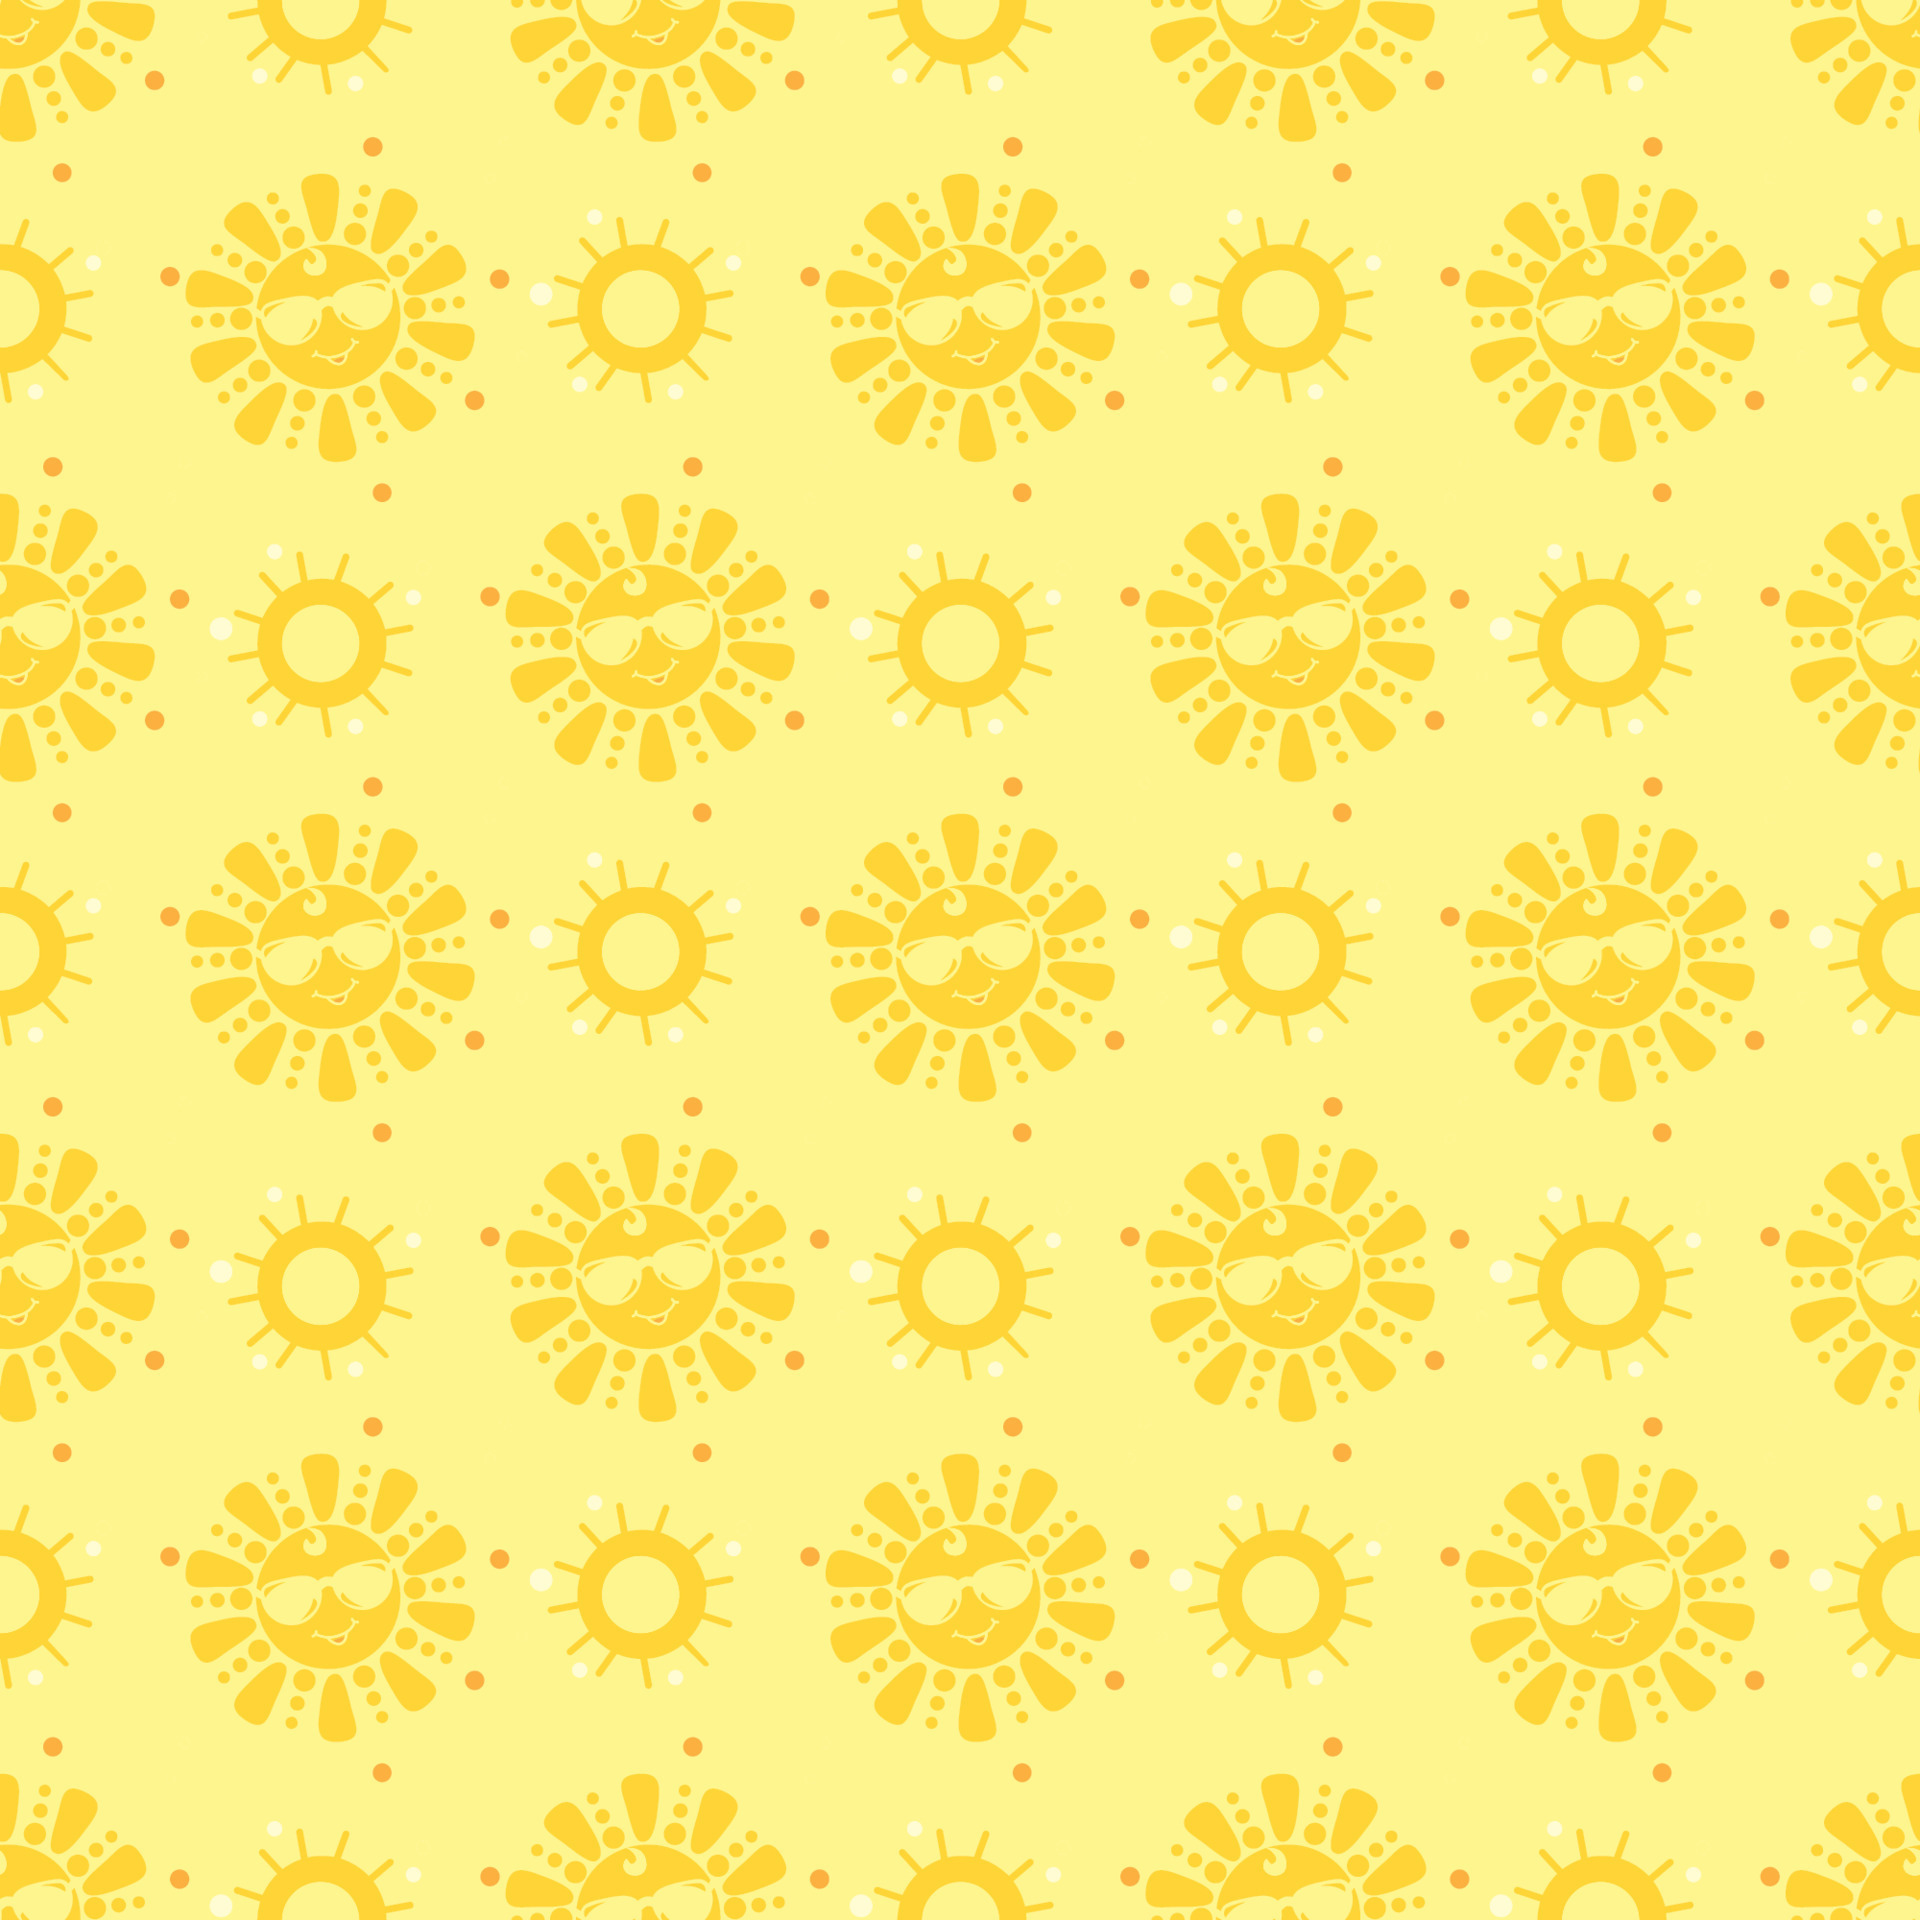 Seamless pattern. A cute yellow sun in sunglasses is smiling. Yellow background. Vector illustration. Design, decor, packaging, printing, wallpaper, textiles, summer illustrations